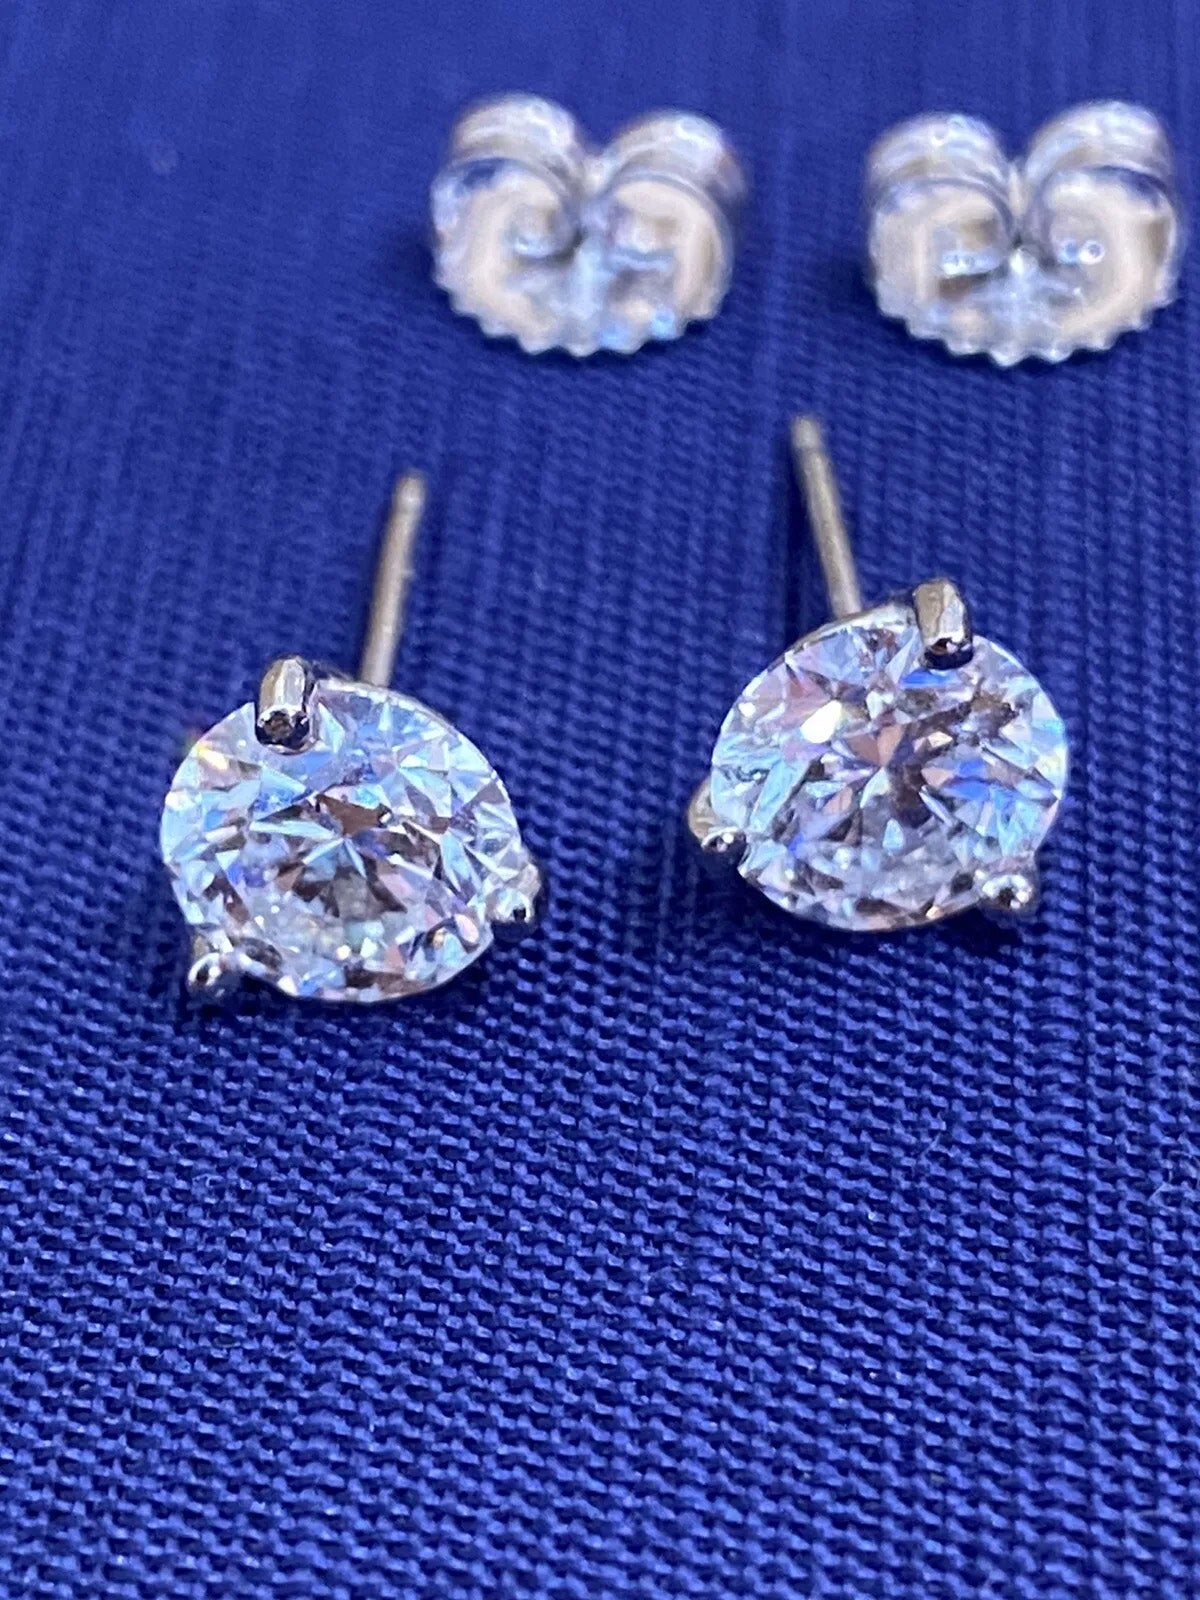 Round Diamond Stud Earrings 2.22 Carat Total Weight GIA certified 18k White Gold

Round Diamond Stud Earrings features 2 GIA Certified Round Brilliant Diamonds with Martini style setting in White Gold.

The first diamond has a weight of 1.10 carats,